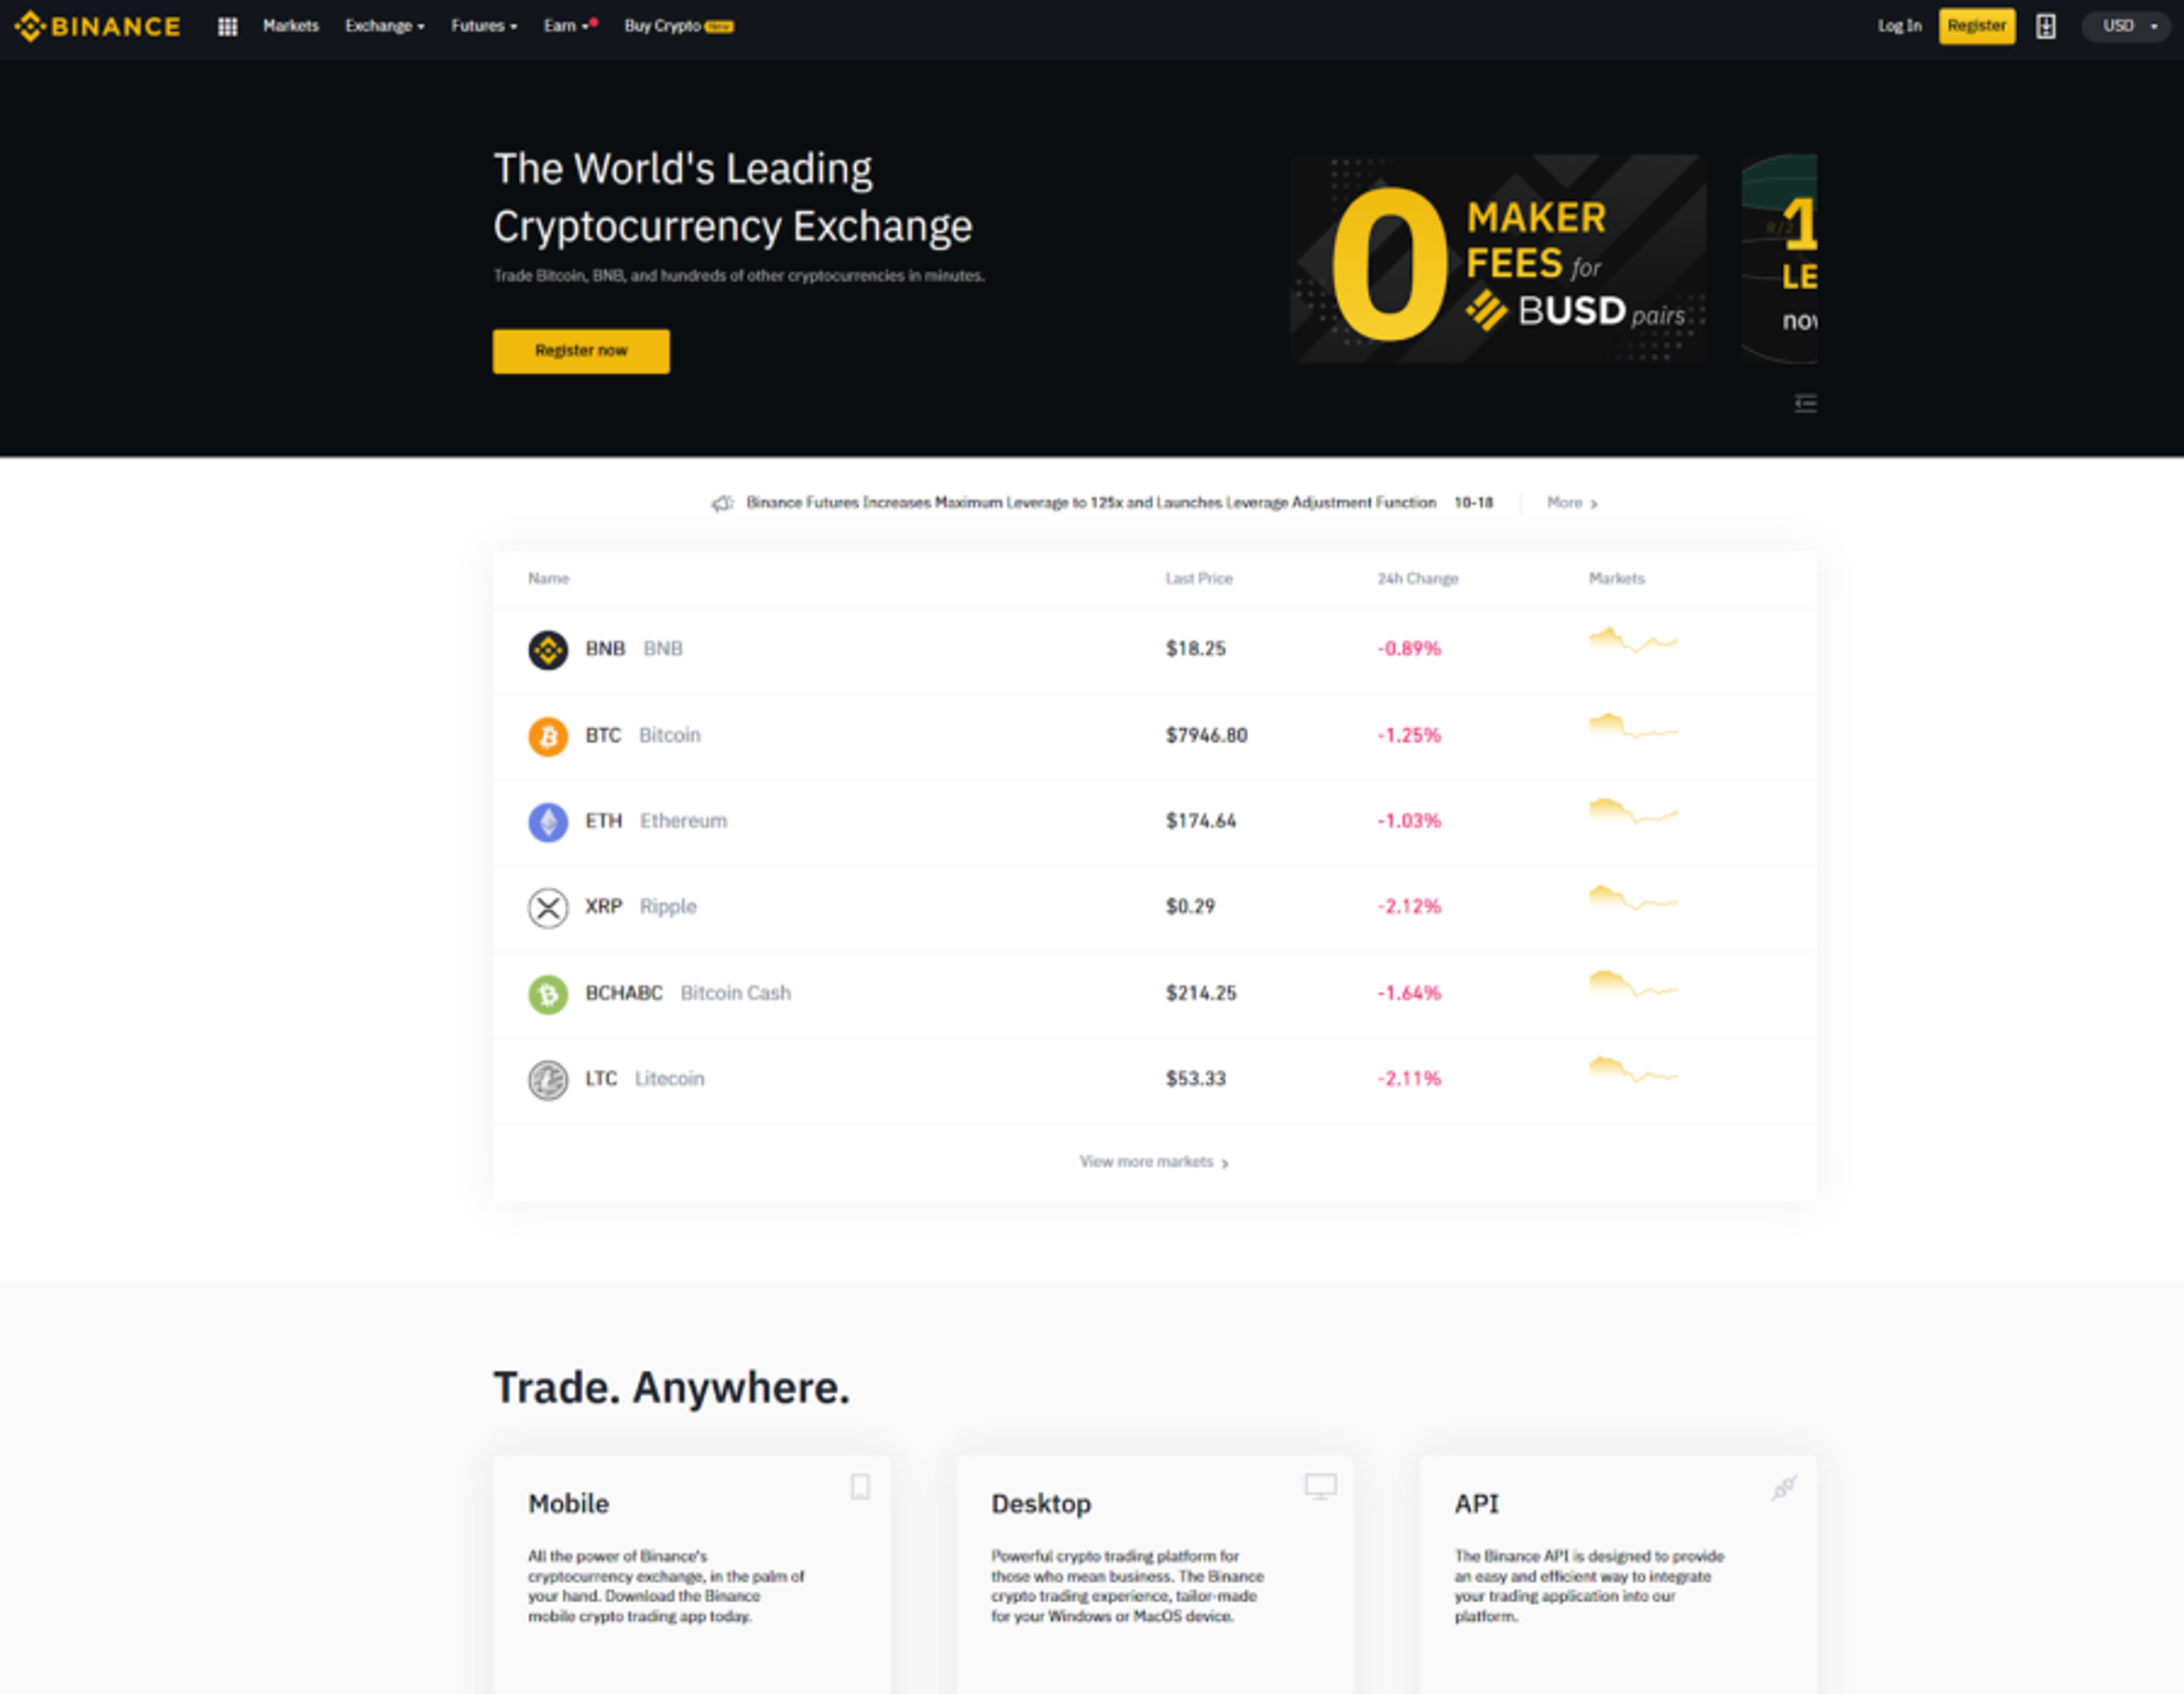 Binance Home Page Showing Prices. 24 Hour Major Cryptocurrencies. From Binance.